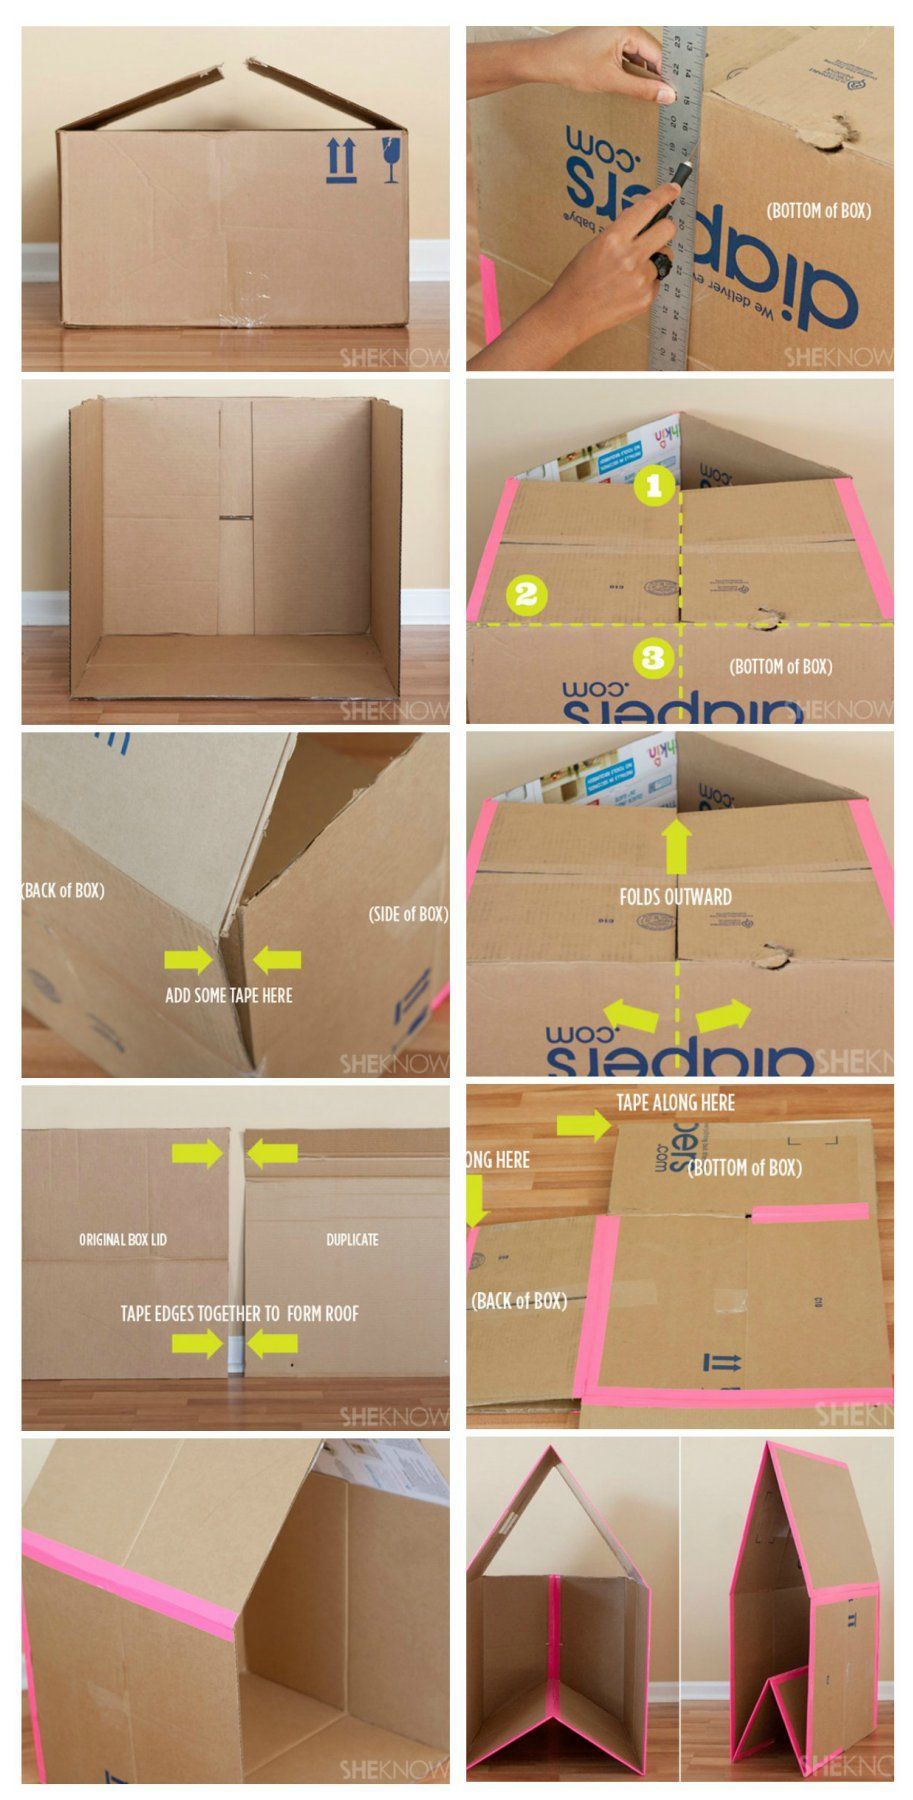 Making a collapsible playhouse out of a simple cardboard box is easier than you think - Making a collapsible playhouse out of a simple cardboard box is easier than you think -   19 diy Box house ideas